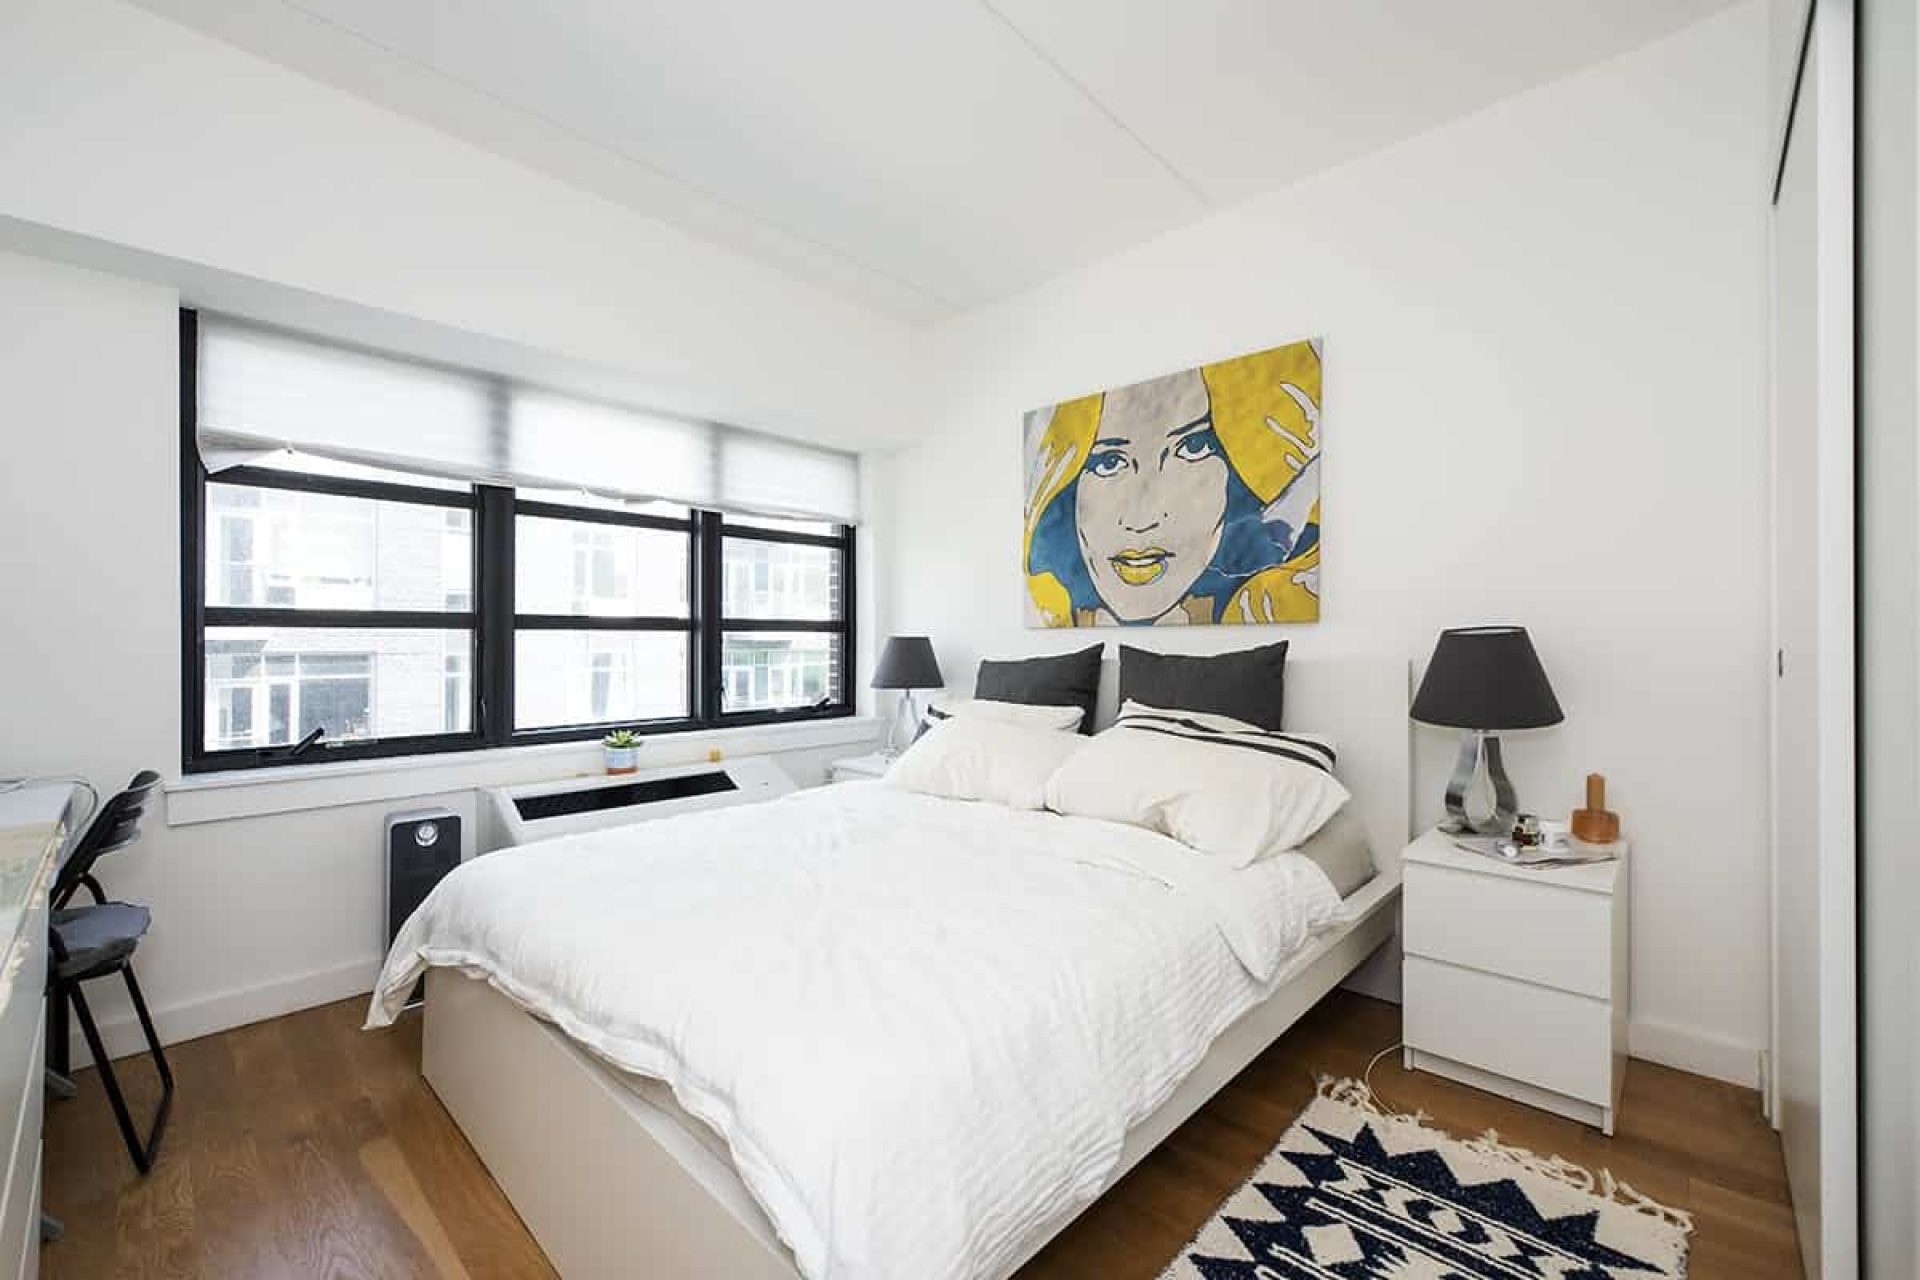 Bedroom at 66 Ainslie Street apartments in Brooklyn with large windows, queen size bed, bed side tables and hardwood floors.